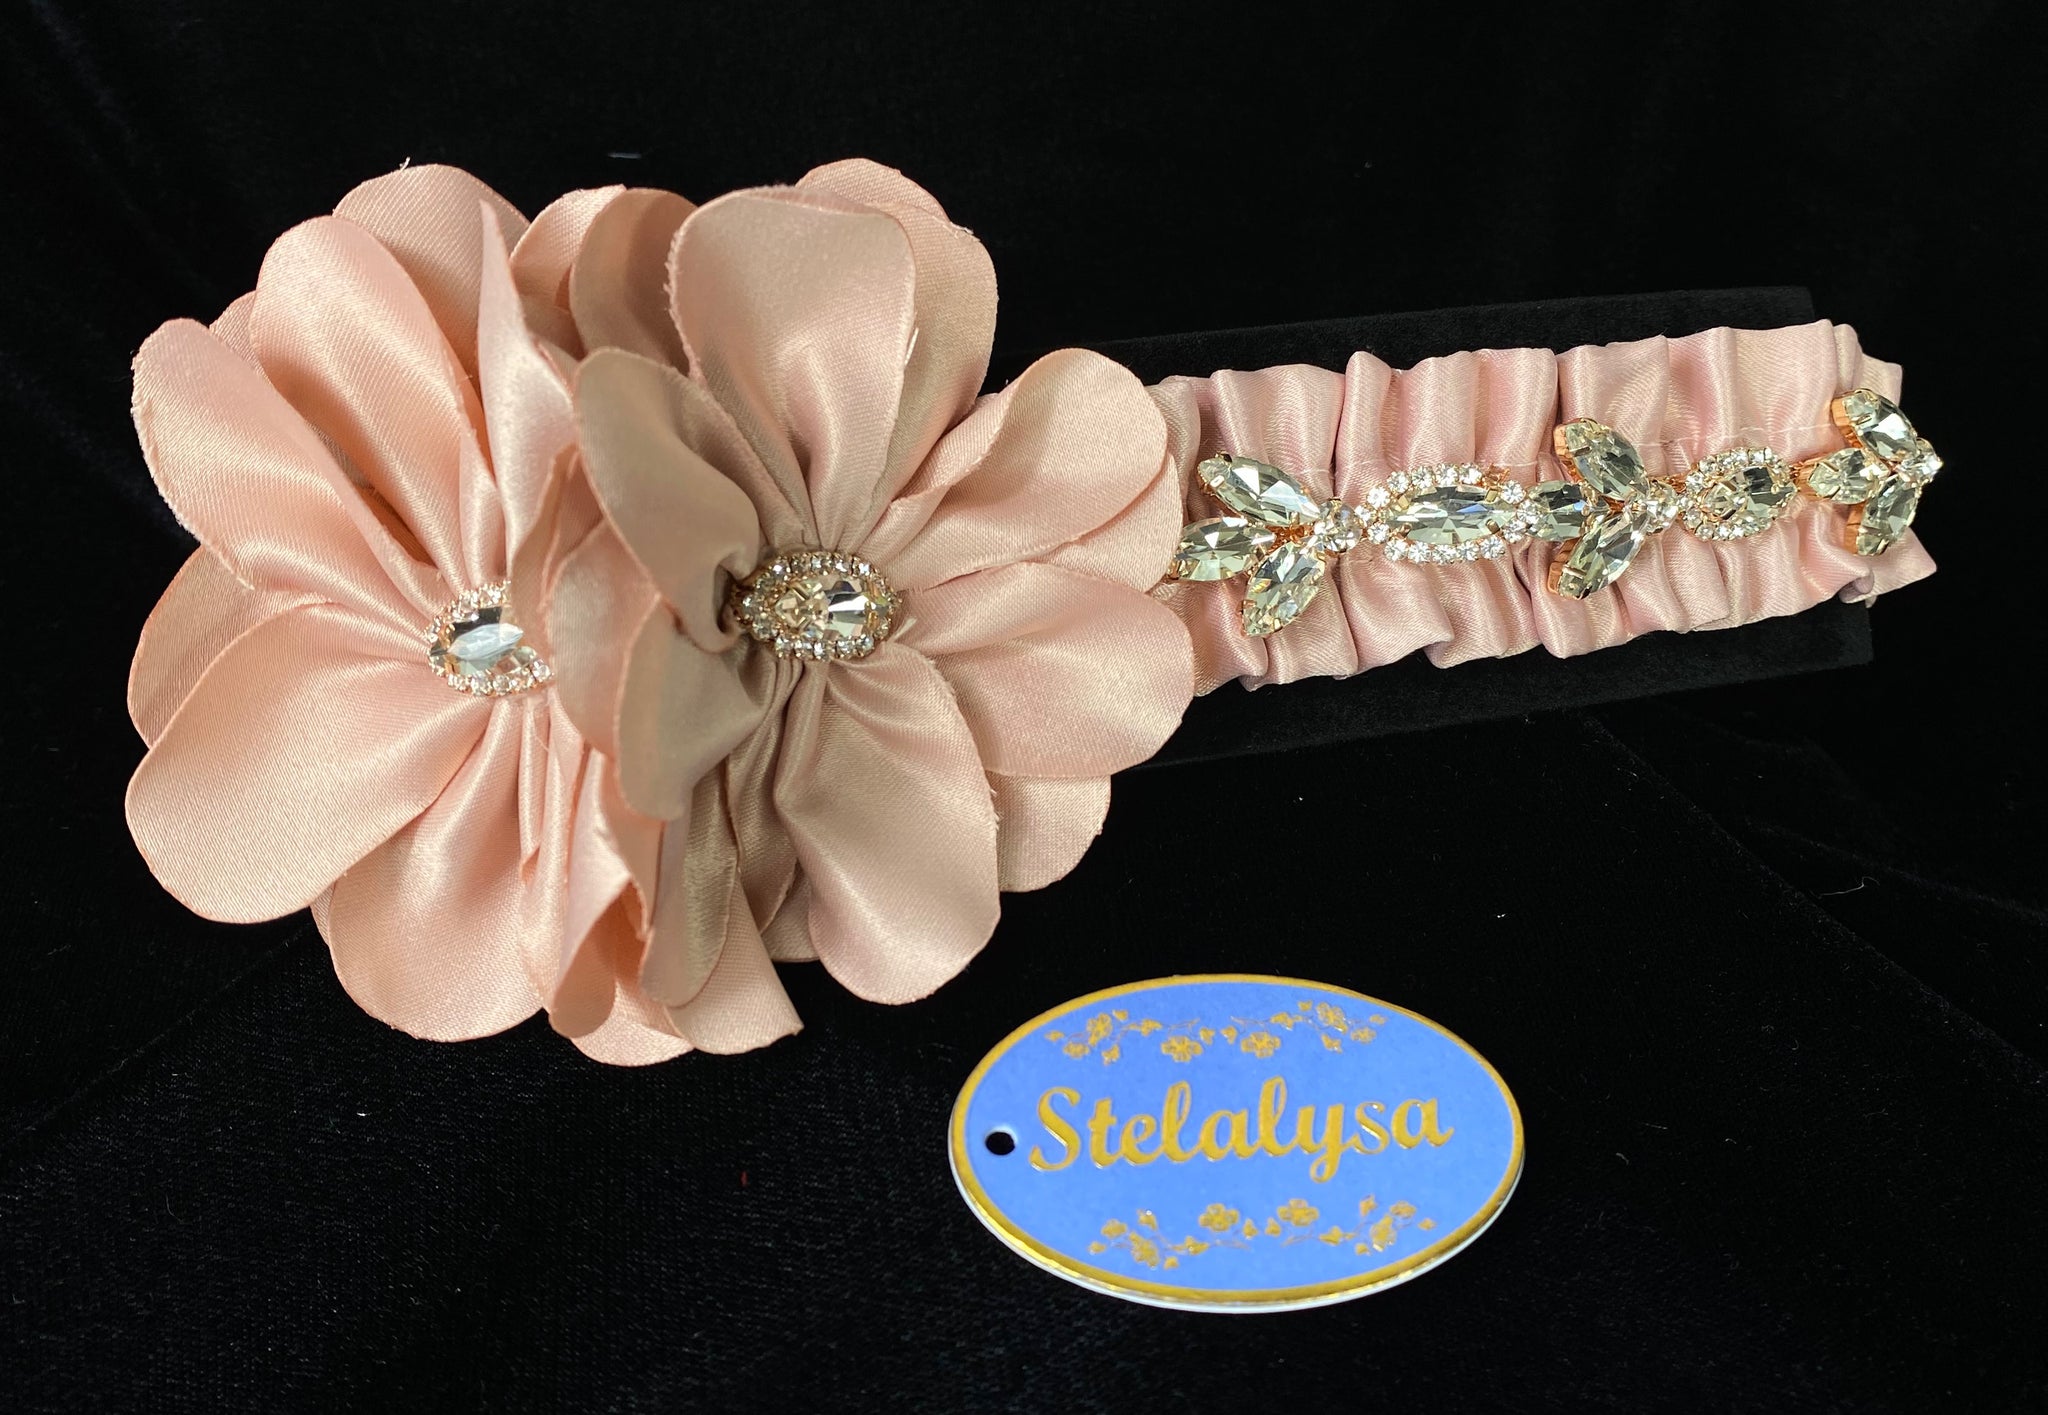 Headwrap - Pink Double Flower with Rhinestones  This is an elegant handmade and one-of-a-kind Pink headwrap with large satin flowers with large rhinestones.  The elastic headwrap is made of a soft satin with an intricate rhinestone design.  This headwrap can be worn with dresses from Stelalysa's Celebration/Pageant Collection and for any occasion!  It fits best on ages 1-6.